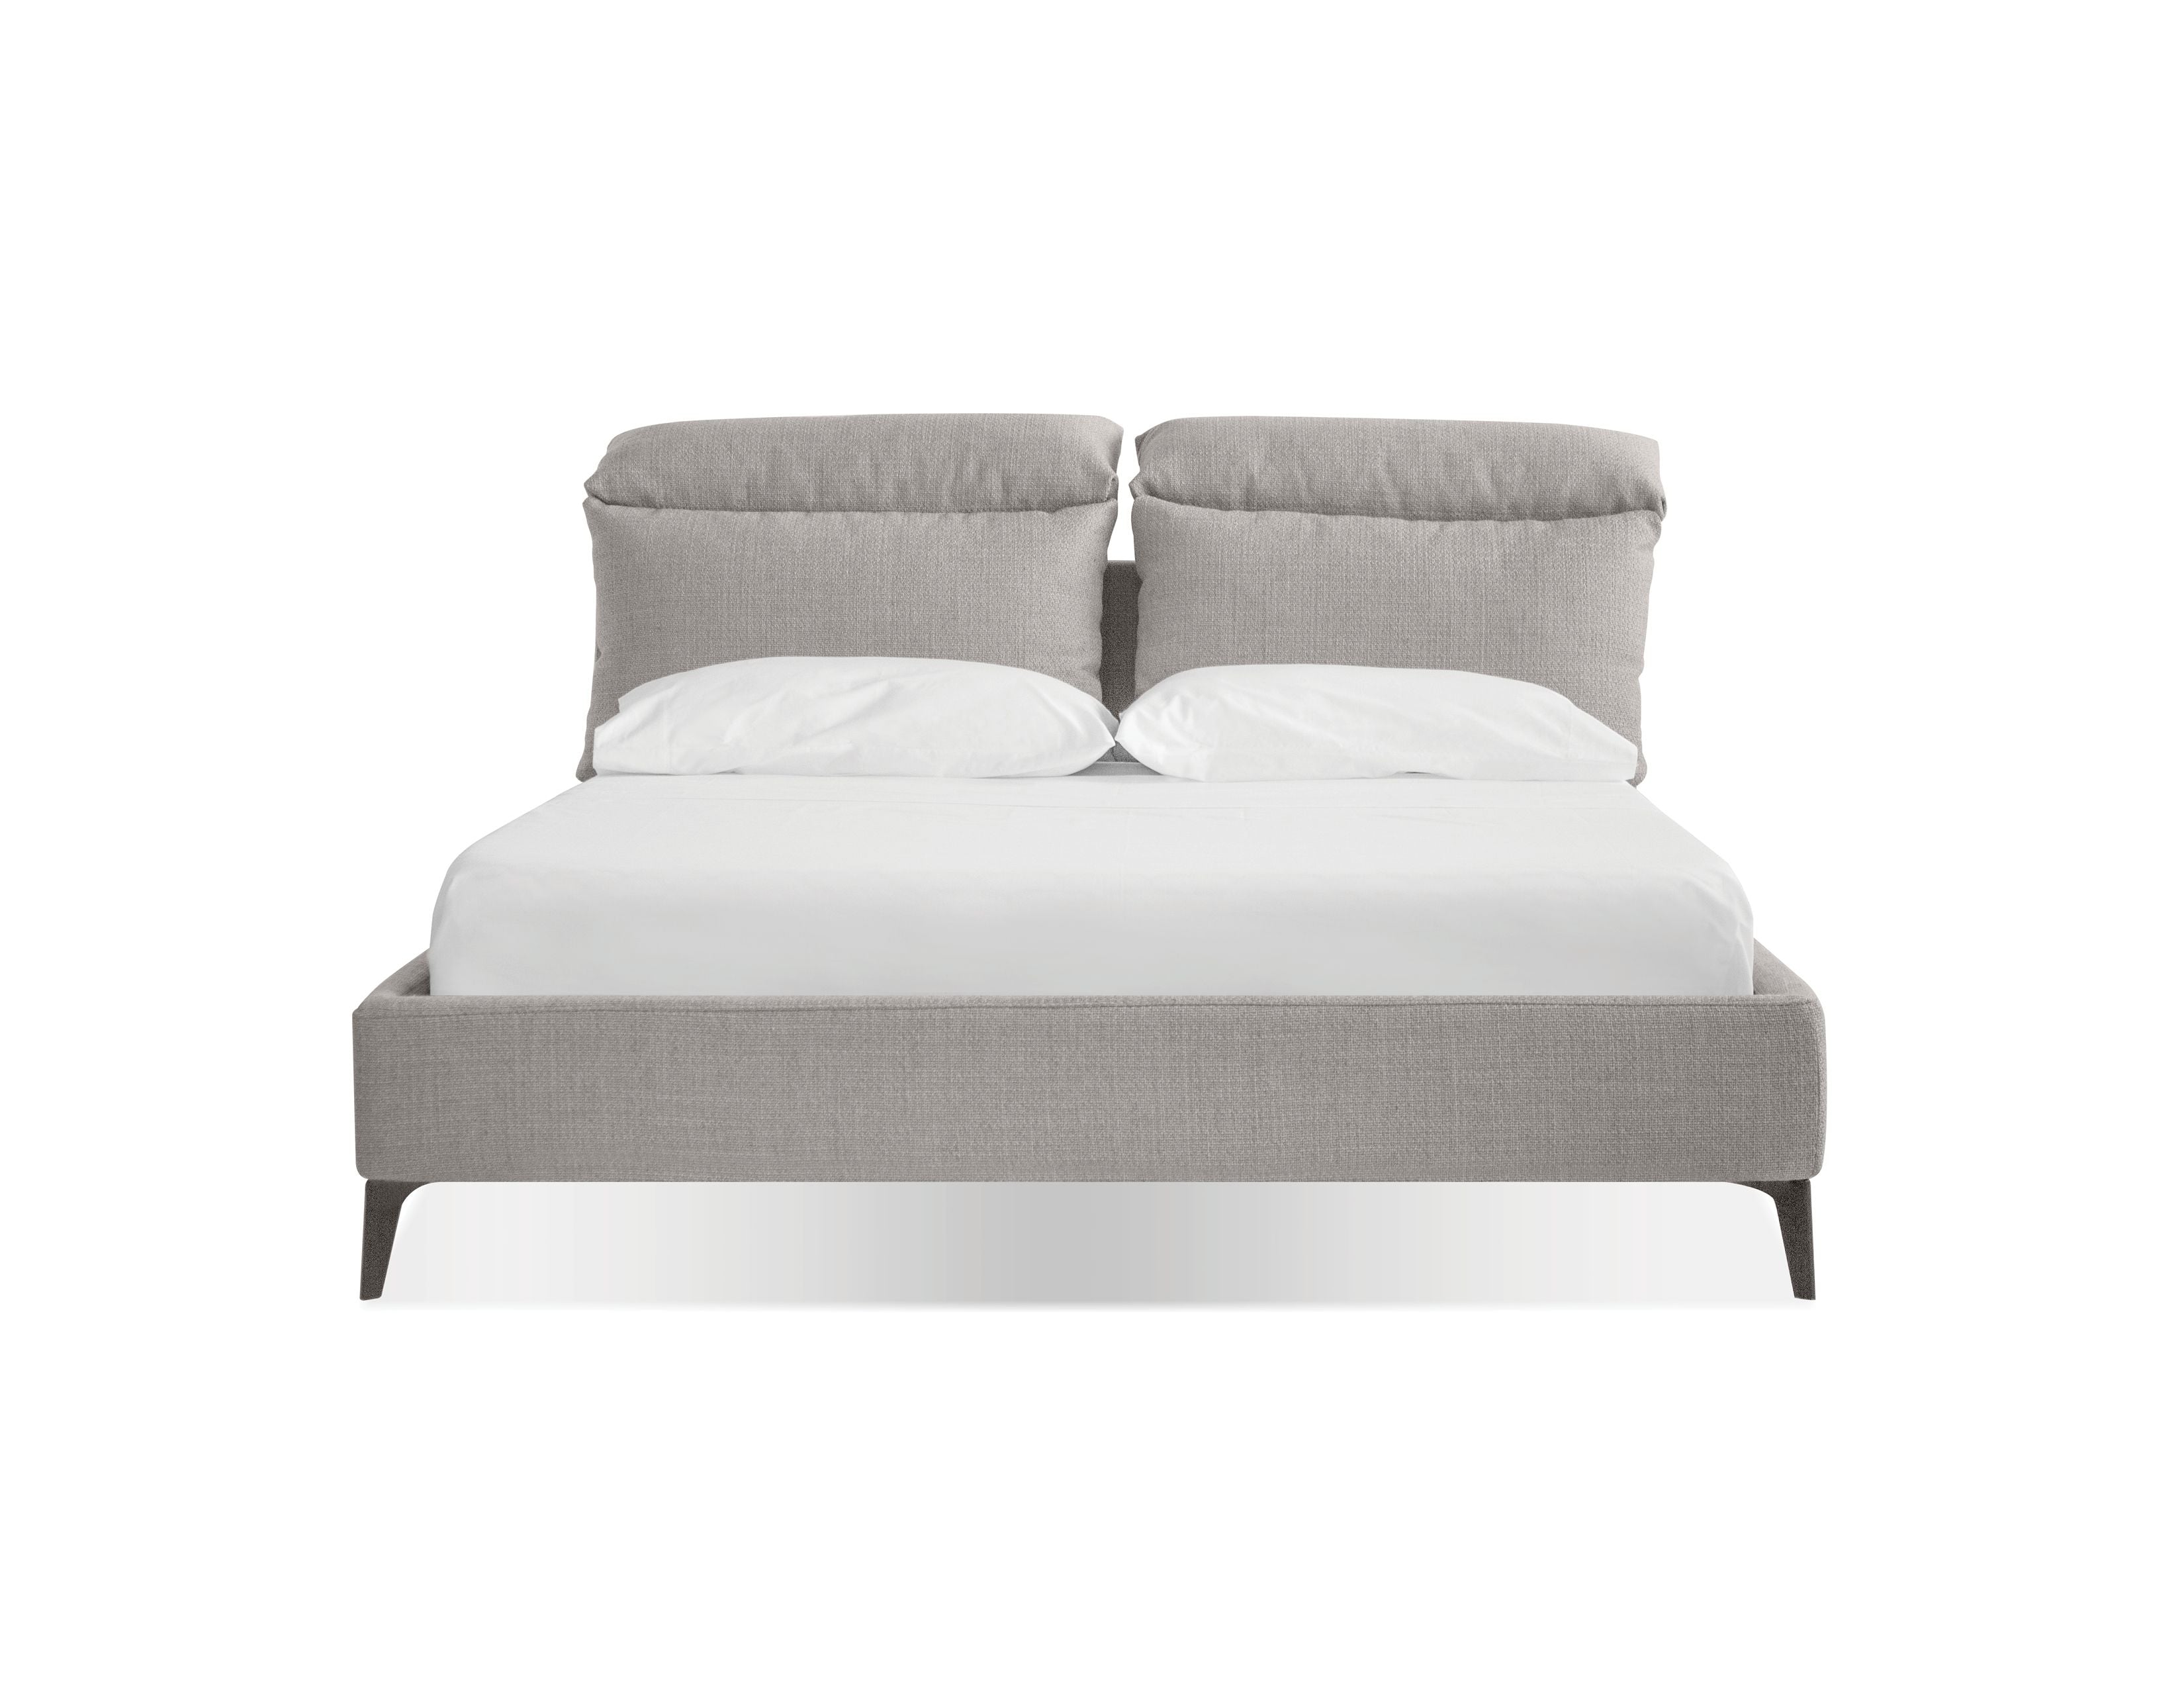 //mobital.ca/cdn/shop/products/BED-CHIL-STON-KING_3.png?v=1703111111&width=360 360w,//mobital.ca/cdn/shop/products/BED-CHIL-STON-KING_3.png?v=1703111111&width=375 375w,//mobital.ca/cdn/shop/products/BED-CHIL-STON-KING_3.png?v=1703111111&width=535 535w,//mobital.ca/cdn/shop/products/BED-CHIL-STON-KING_3.png?v=1703111111&width=750 750w,//mobital.ca/cdn/shop/products/BED-CHIL-STON-KING_3.png?v=1703111111&width=1024 1024w,//mobital.ca/cdn/shop/products/BED-CHIL-STON-KING_3.png?v=1703111111&width=1280 1280w,//mobital.ca/cdn/shop/products/BED-CHIL-STON-KING_3.png?v=1703111111&width=1366 1366w,//mobital.ca/cdn/shop/products/BED-CHIL-STON-KING_3.png?v=1703111111&width=1440 1440w,//mobital.ca/cdn/shop/products/BED-CHIL-STON-KING_3.png?v=1703111111&width=1920 1920w,//mobital.ca/cdn/shop/products/BED-CHIL-STON-KING_3.png?v=1703111111&width=2880 2880w